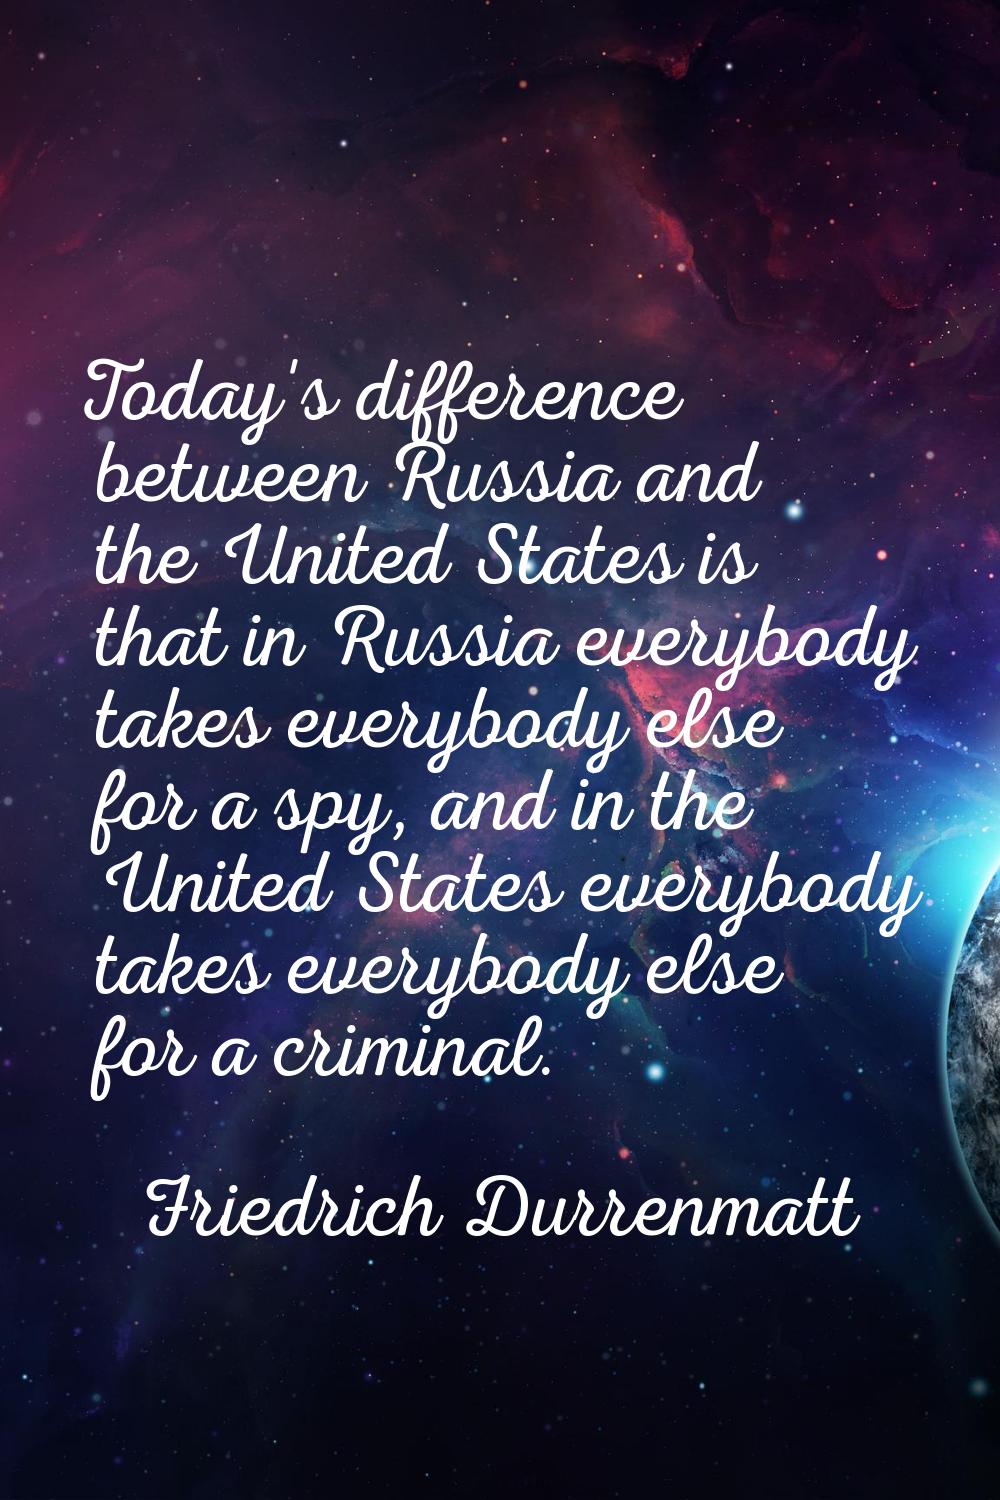 Today's difference between Russia and the United States is that in Russia everybody takes everybody